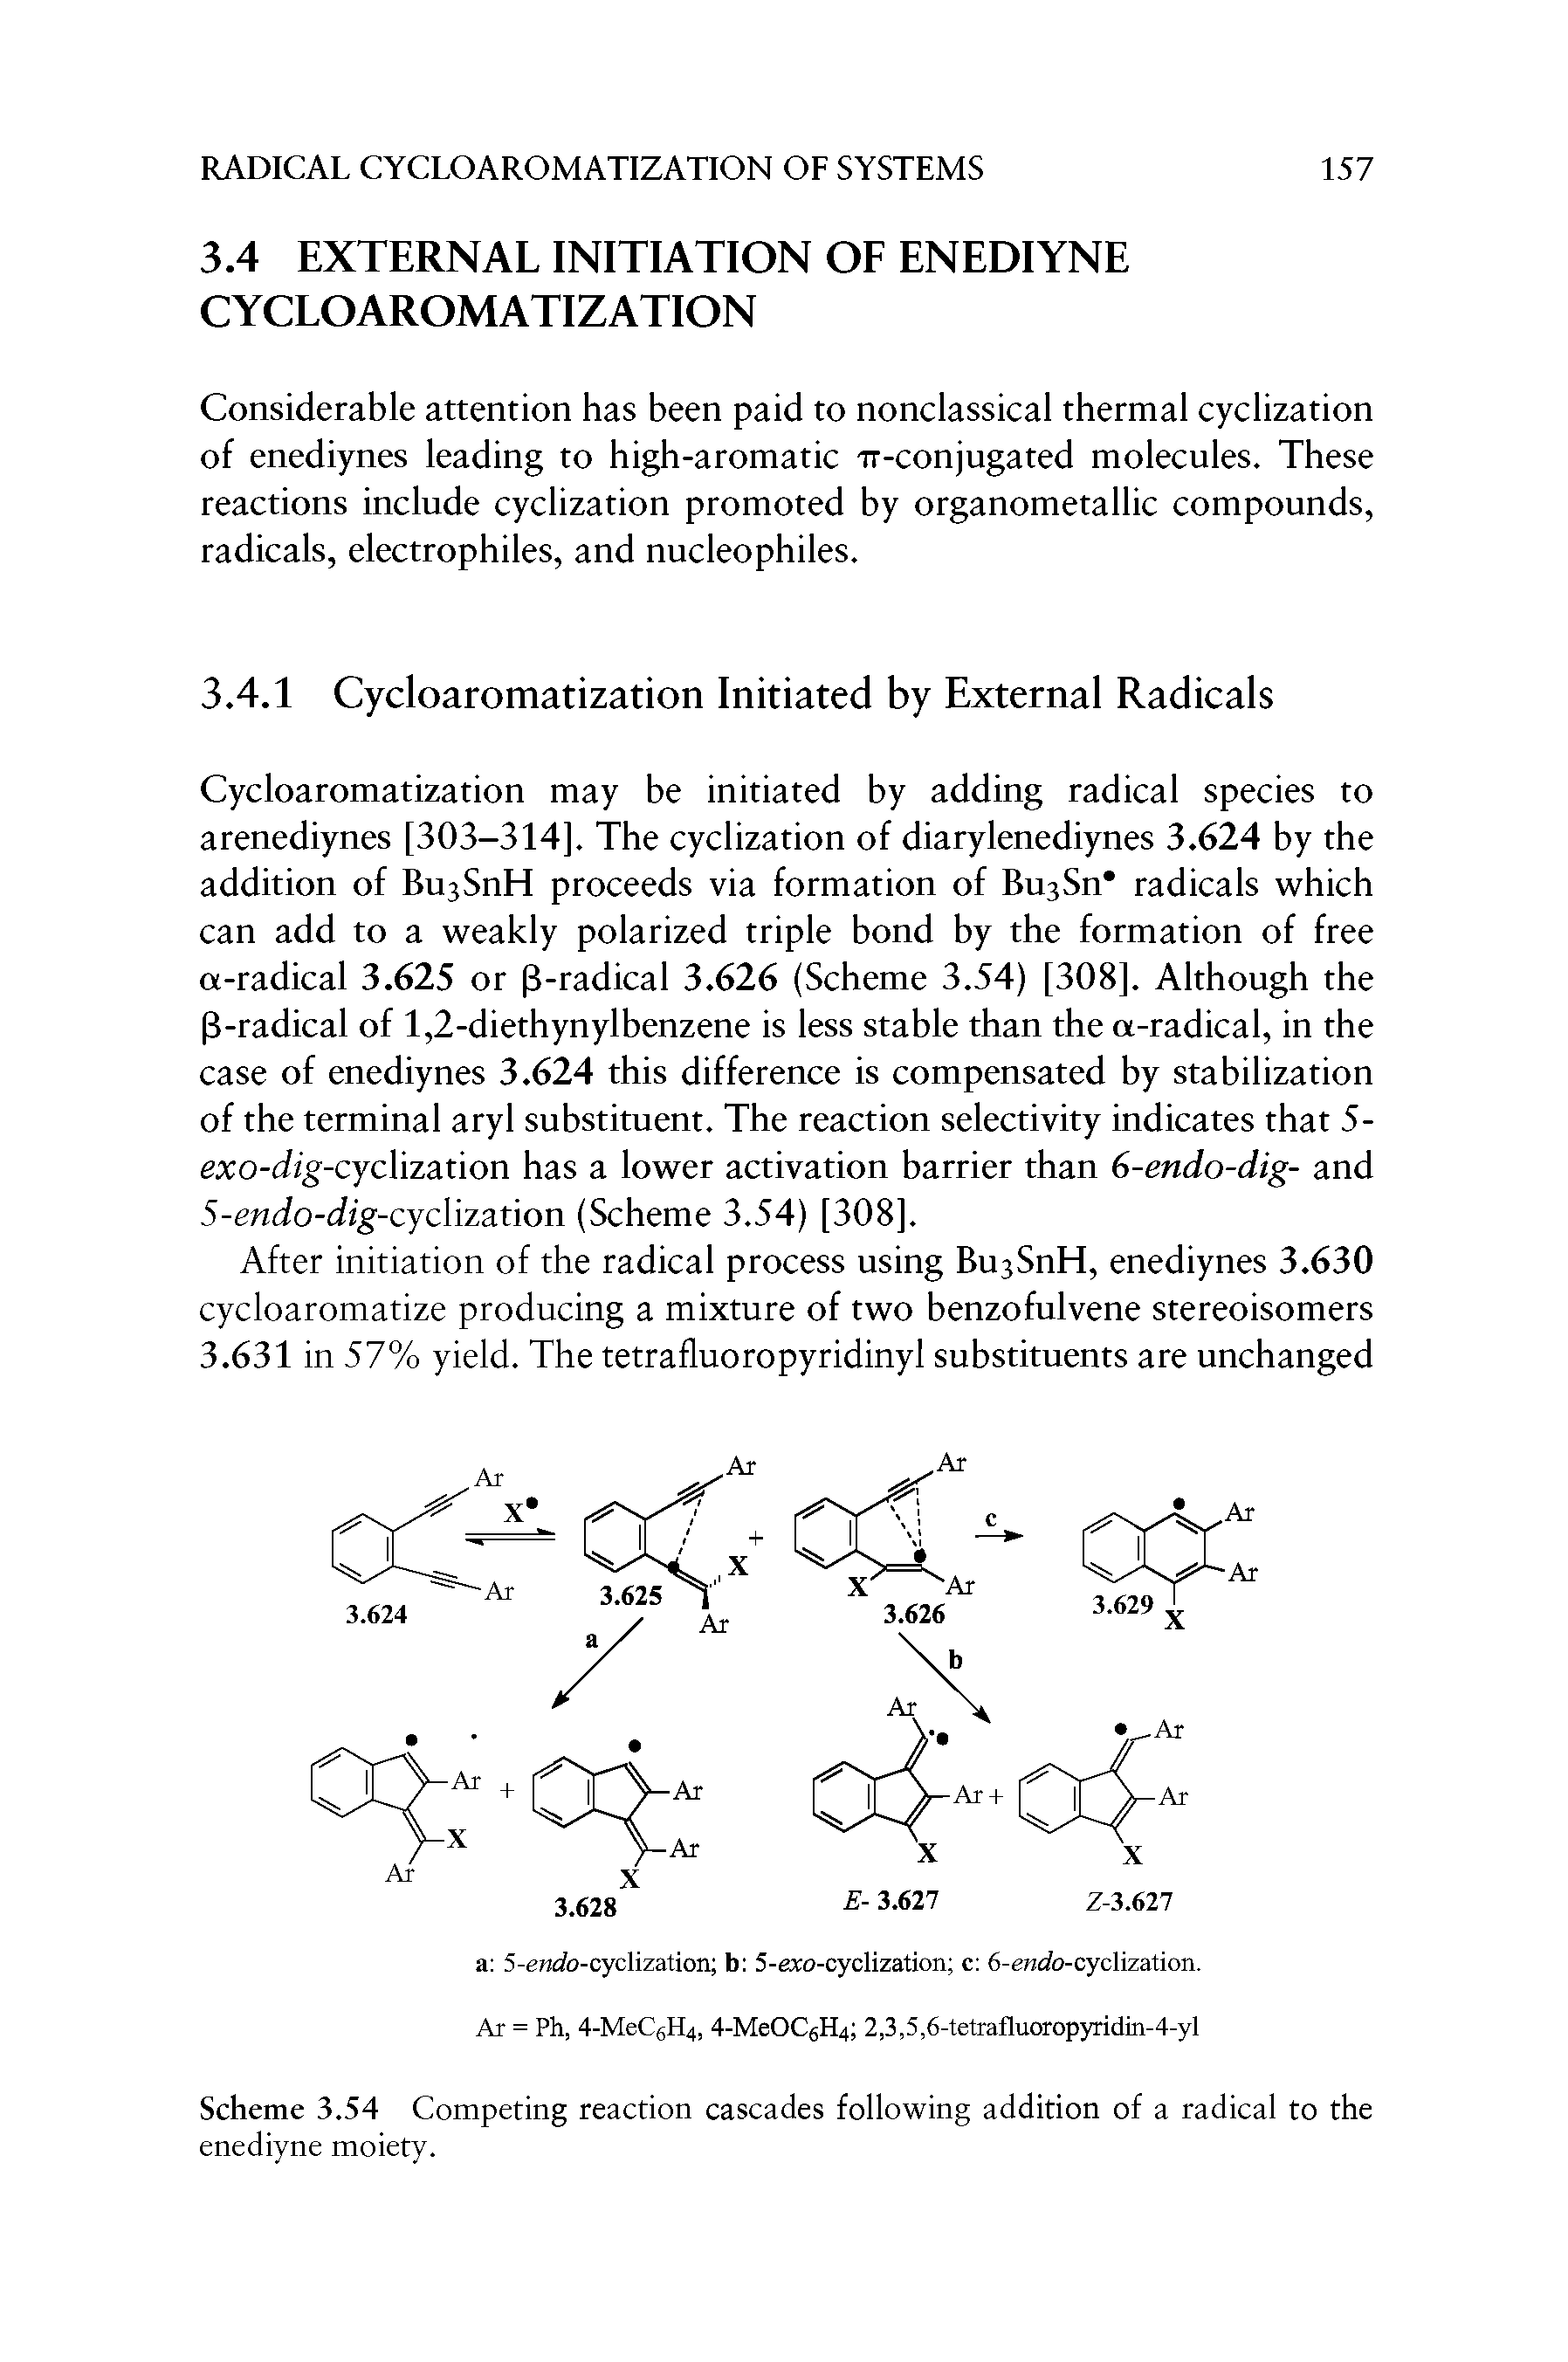 Scheme 3.54 Competing reaction cascades following addition of a radical to the enediyne moiety.